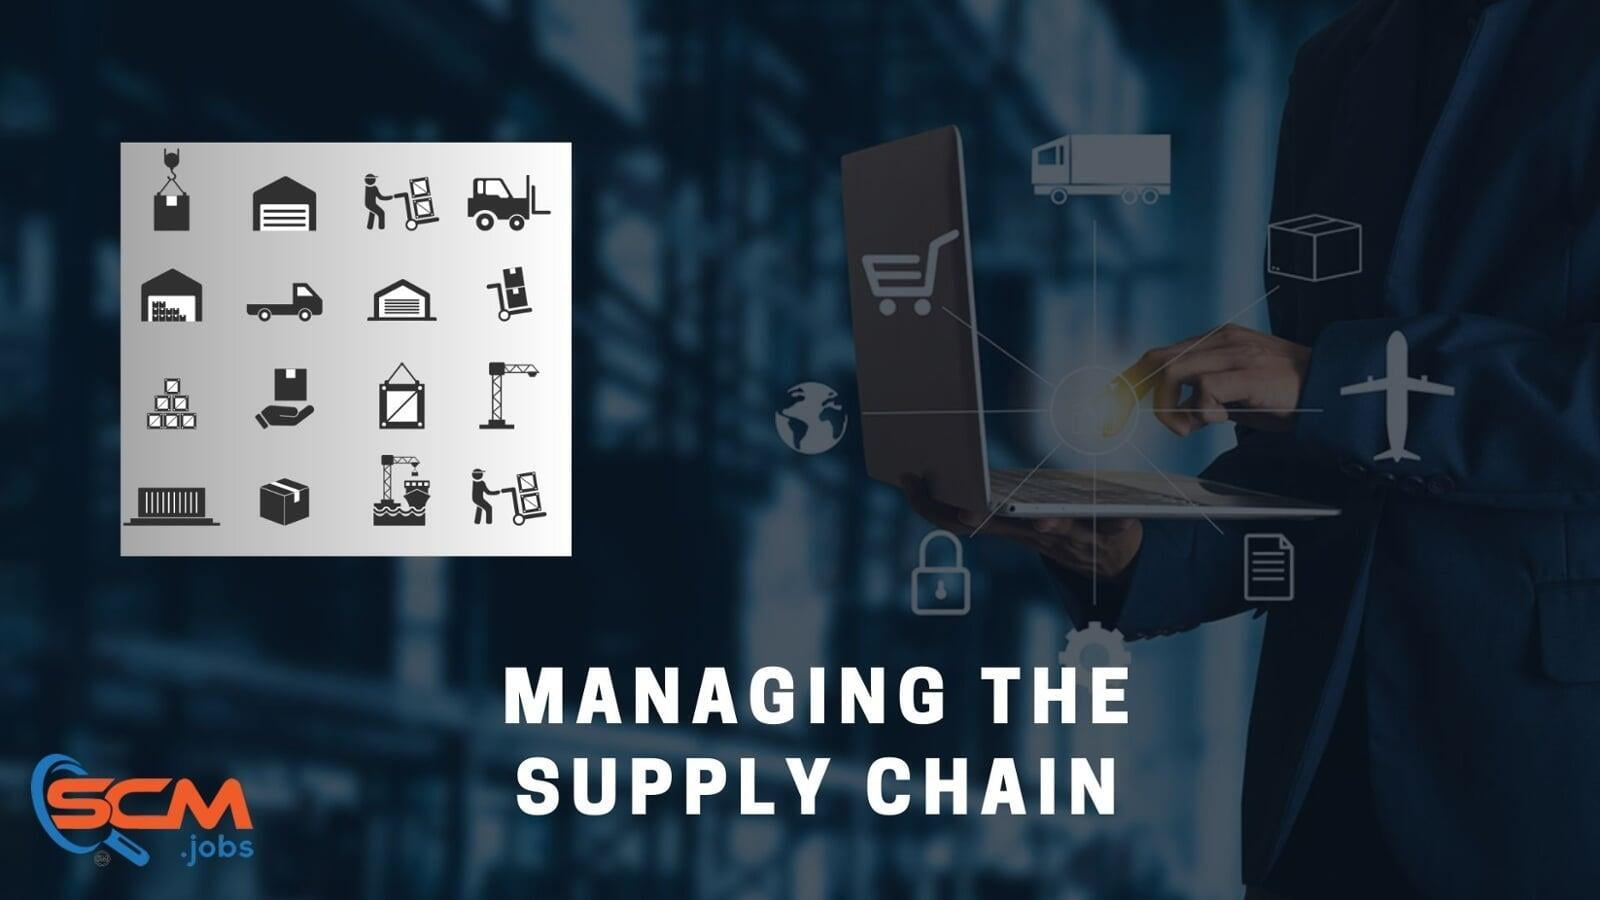 Managing the Supply Chain - Should You Outsource?